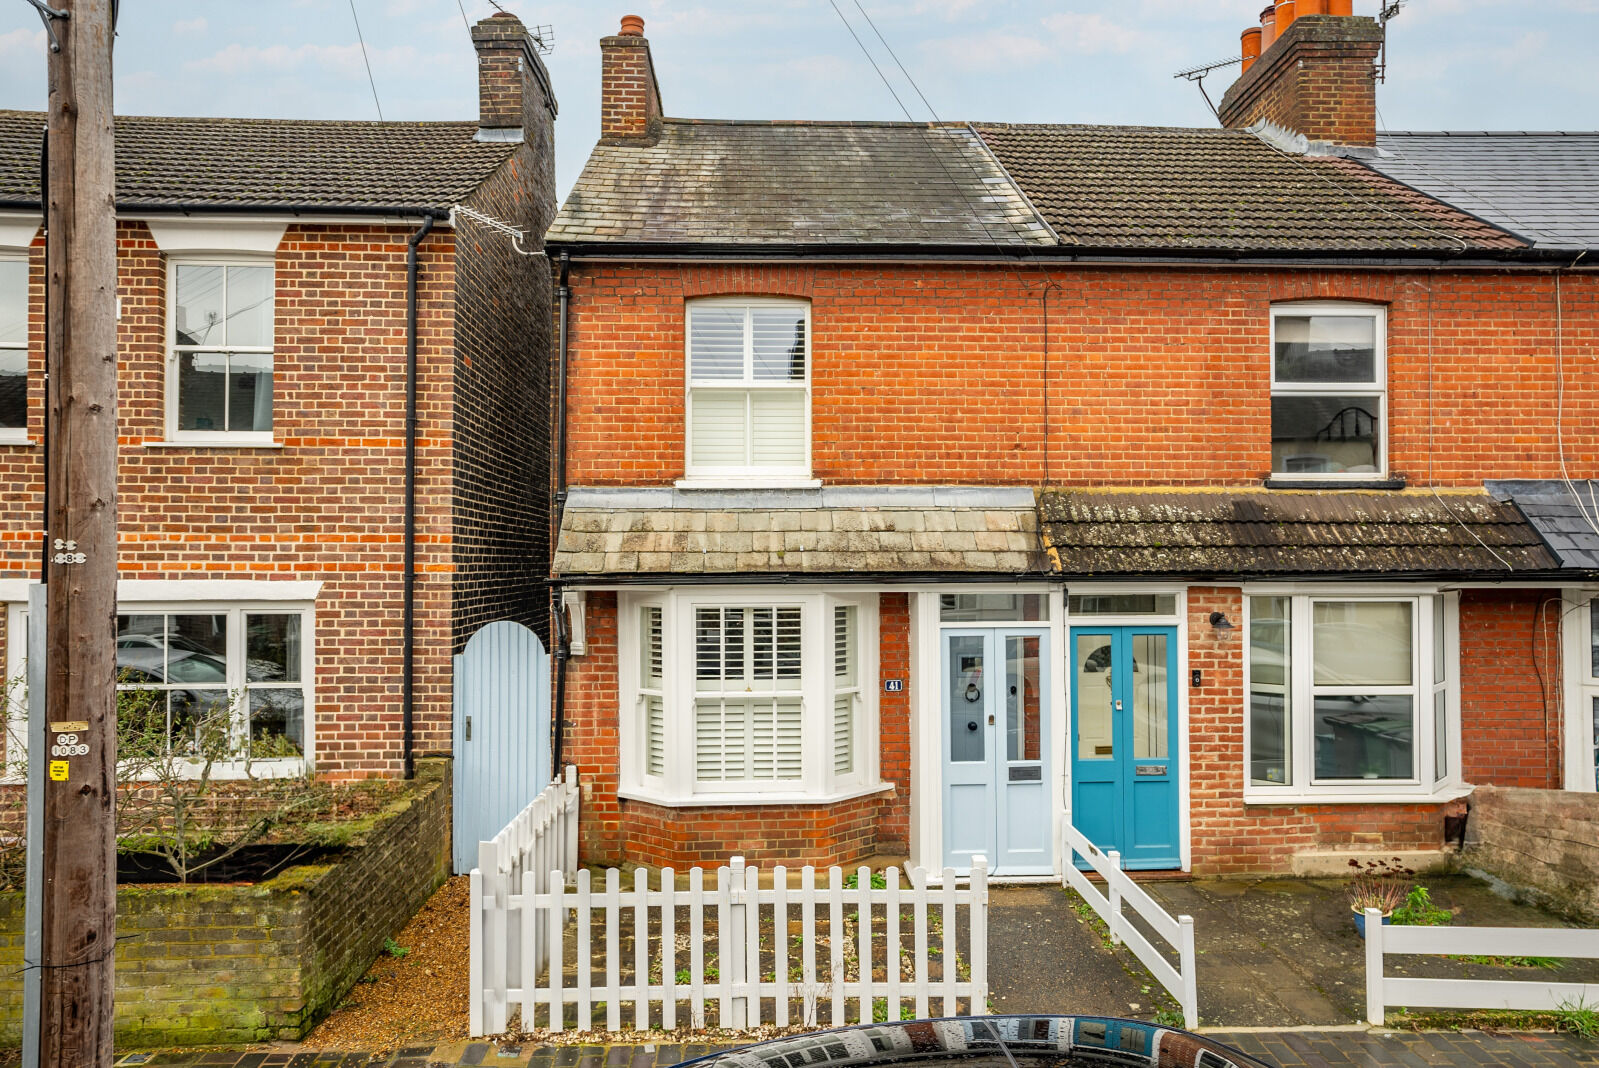 3 bedroom end terraced house for sale Culver Road, St. Albans, AL1, main image